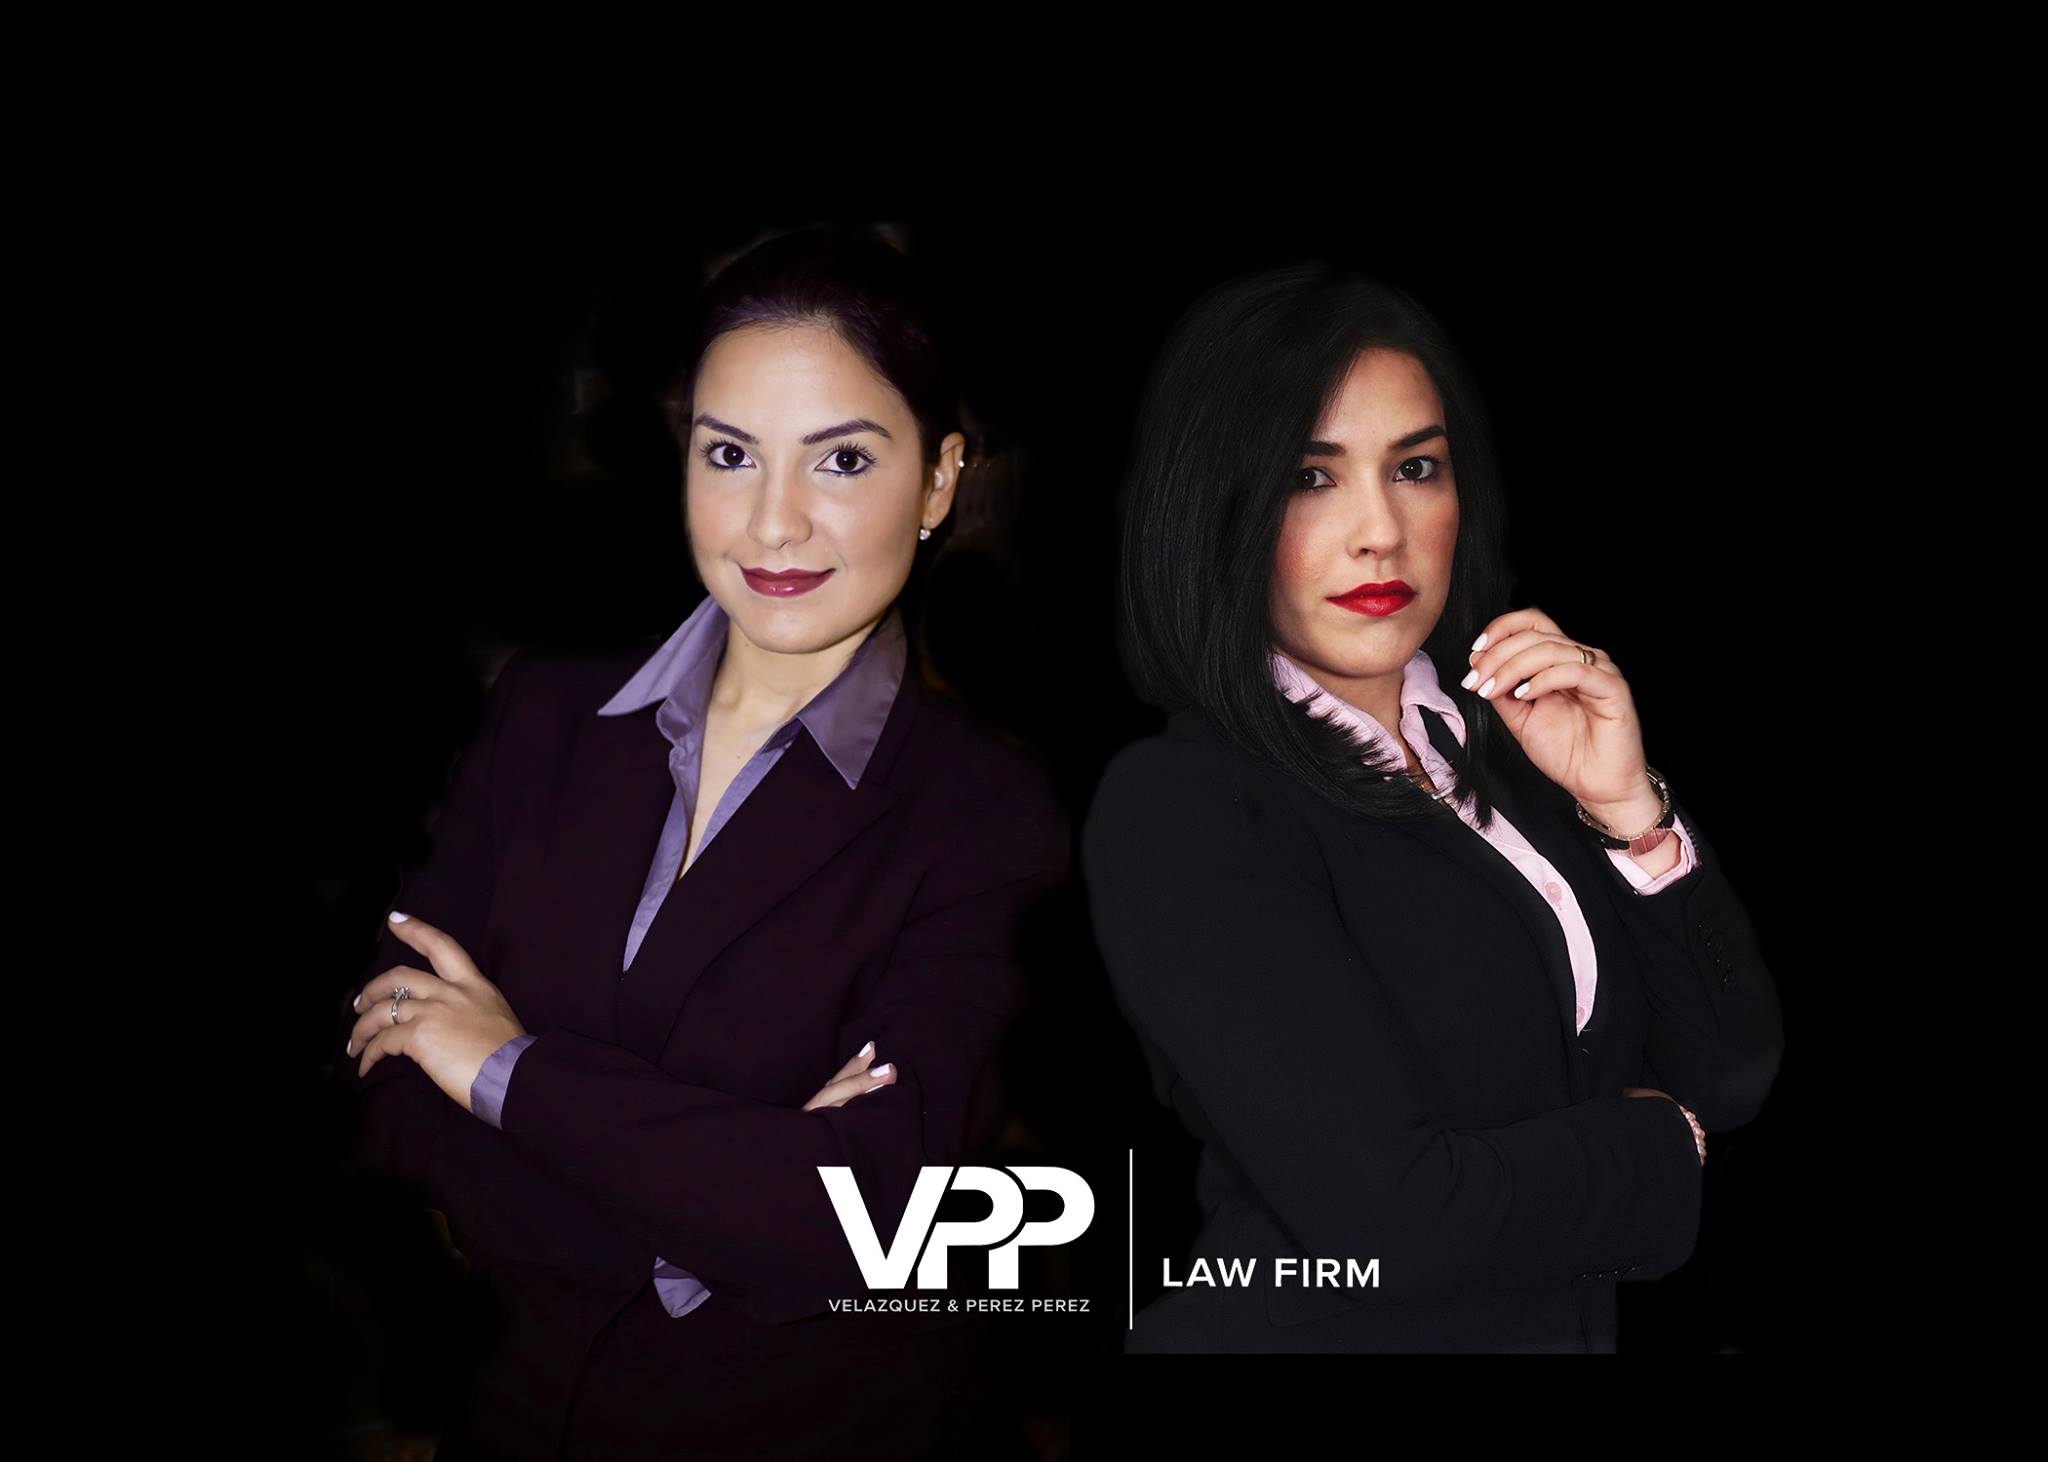 Image VPP Law Firm the Insurance Attorneys in Miami FL - Gallery of ListasLocales.com